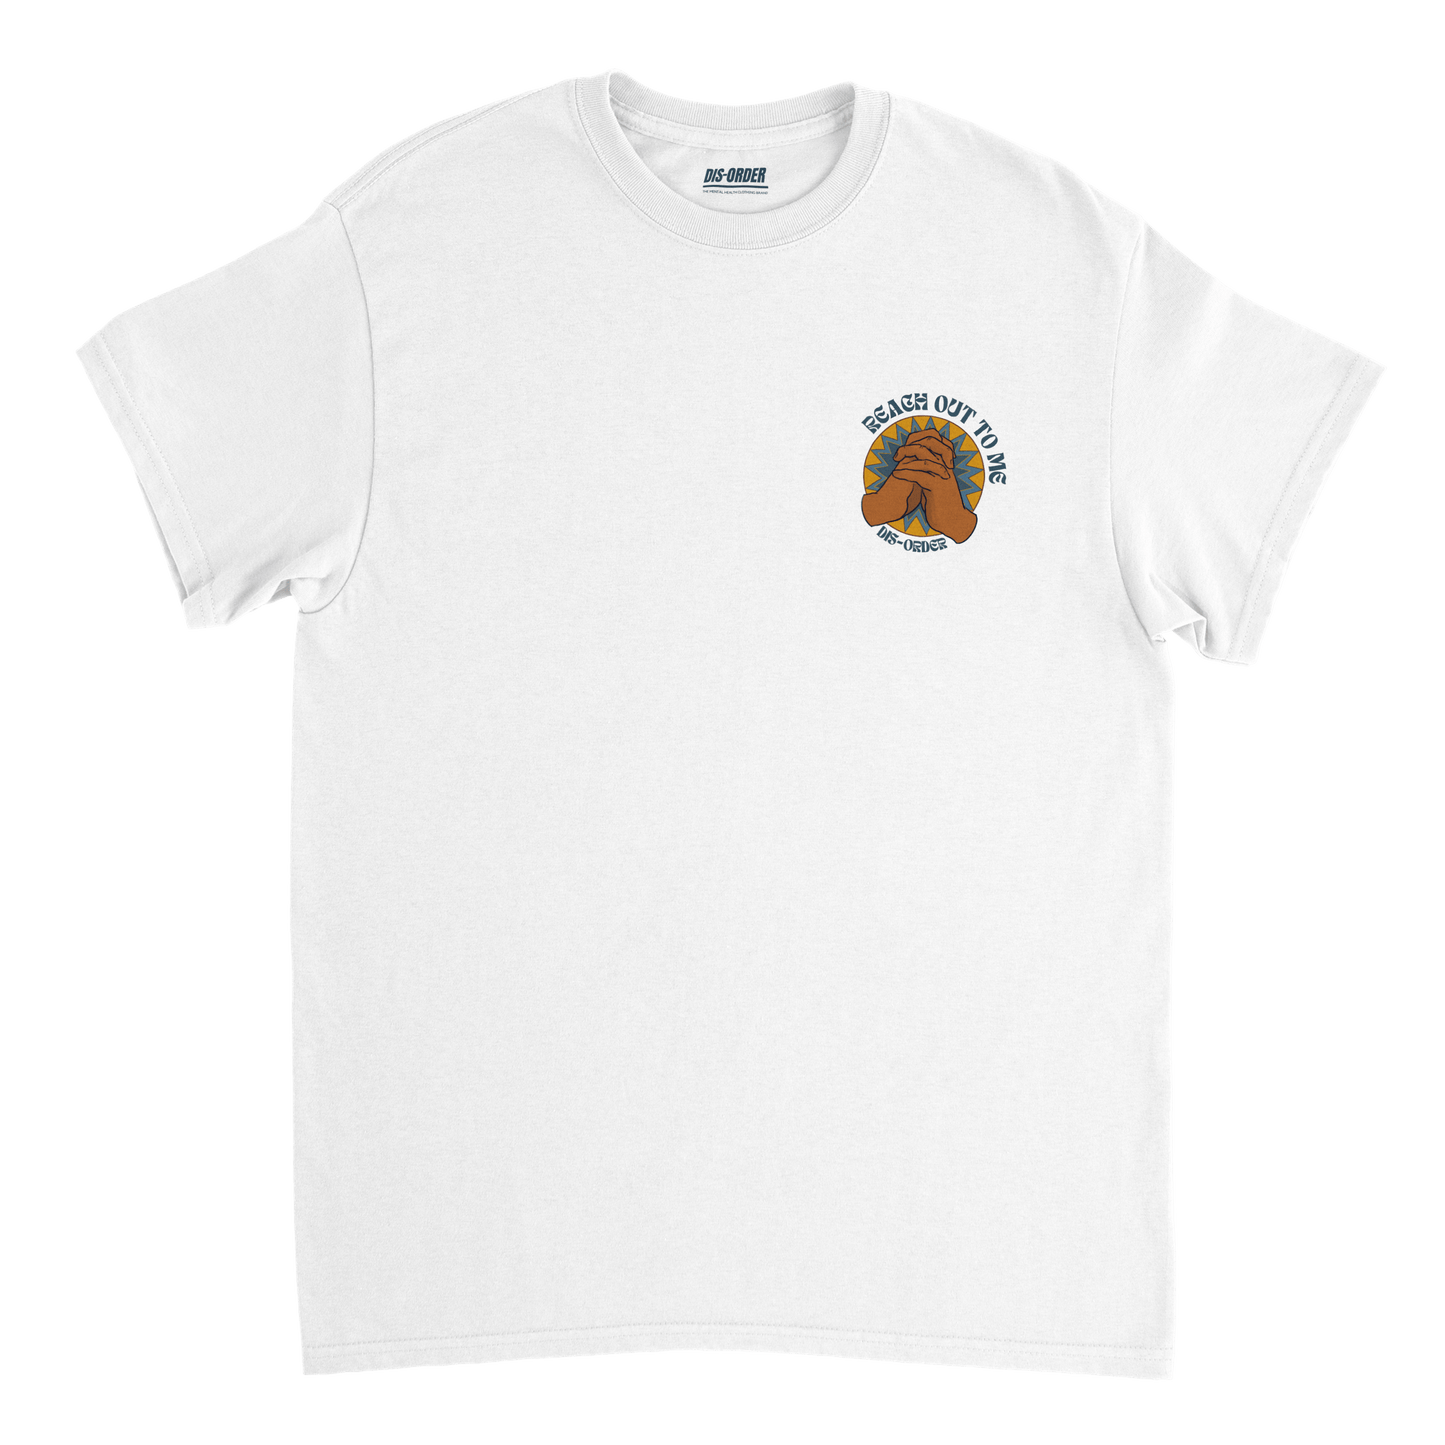 REACH OUT TO ME - Tee